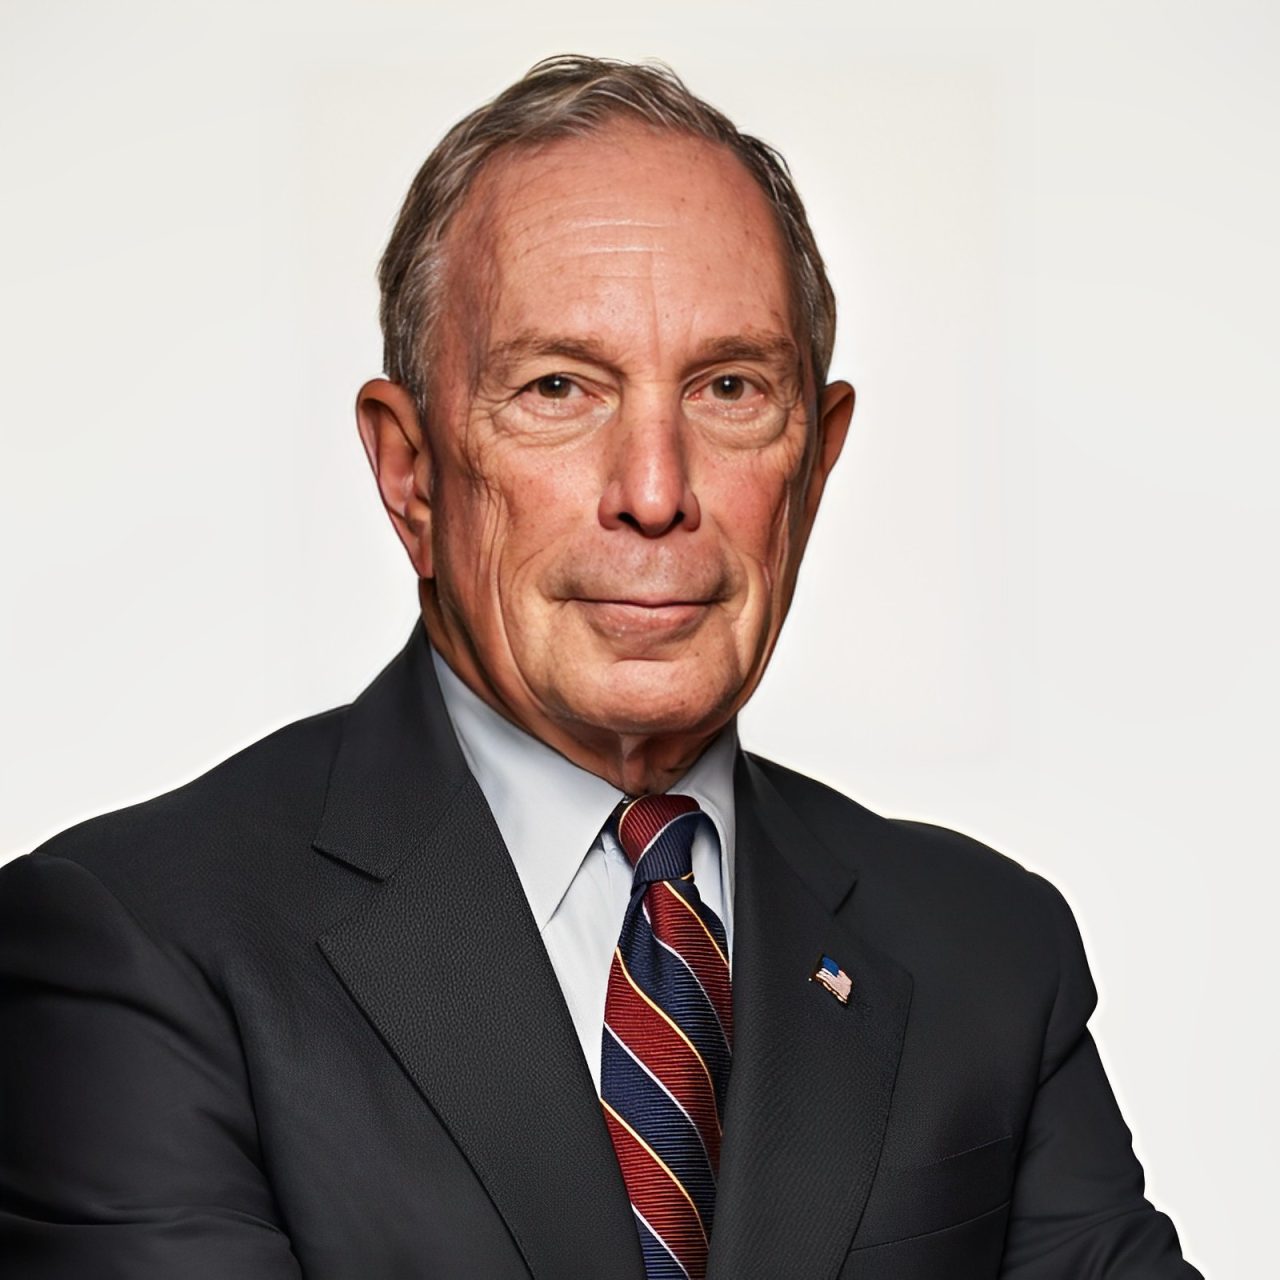 For 15 years, Bloomberg Philanthropies and World Health Organization have worked collaboratively to cut smoking rates globally – Mike Bloomberg